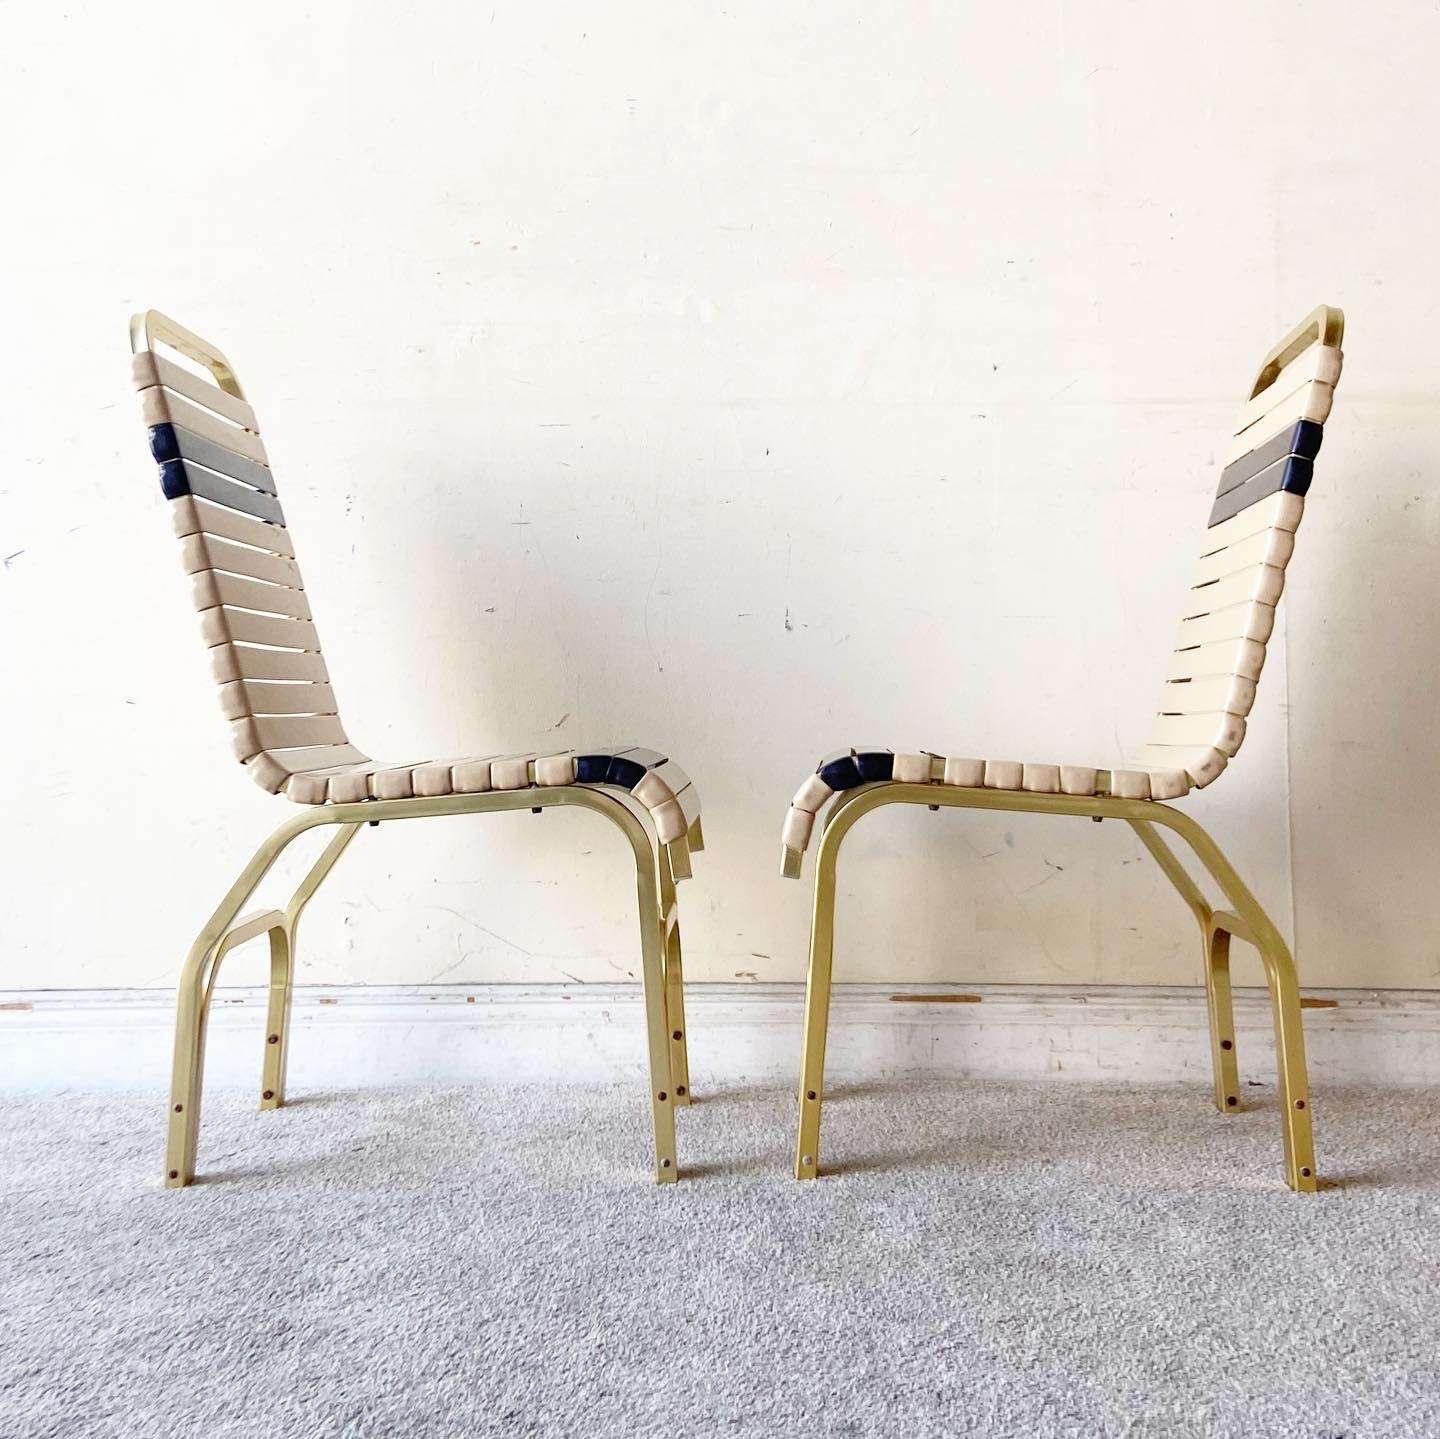 American Miami Gold Beige & Blue Metal Poolside Chairs and Table - 3 Pieces For Sale